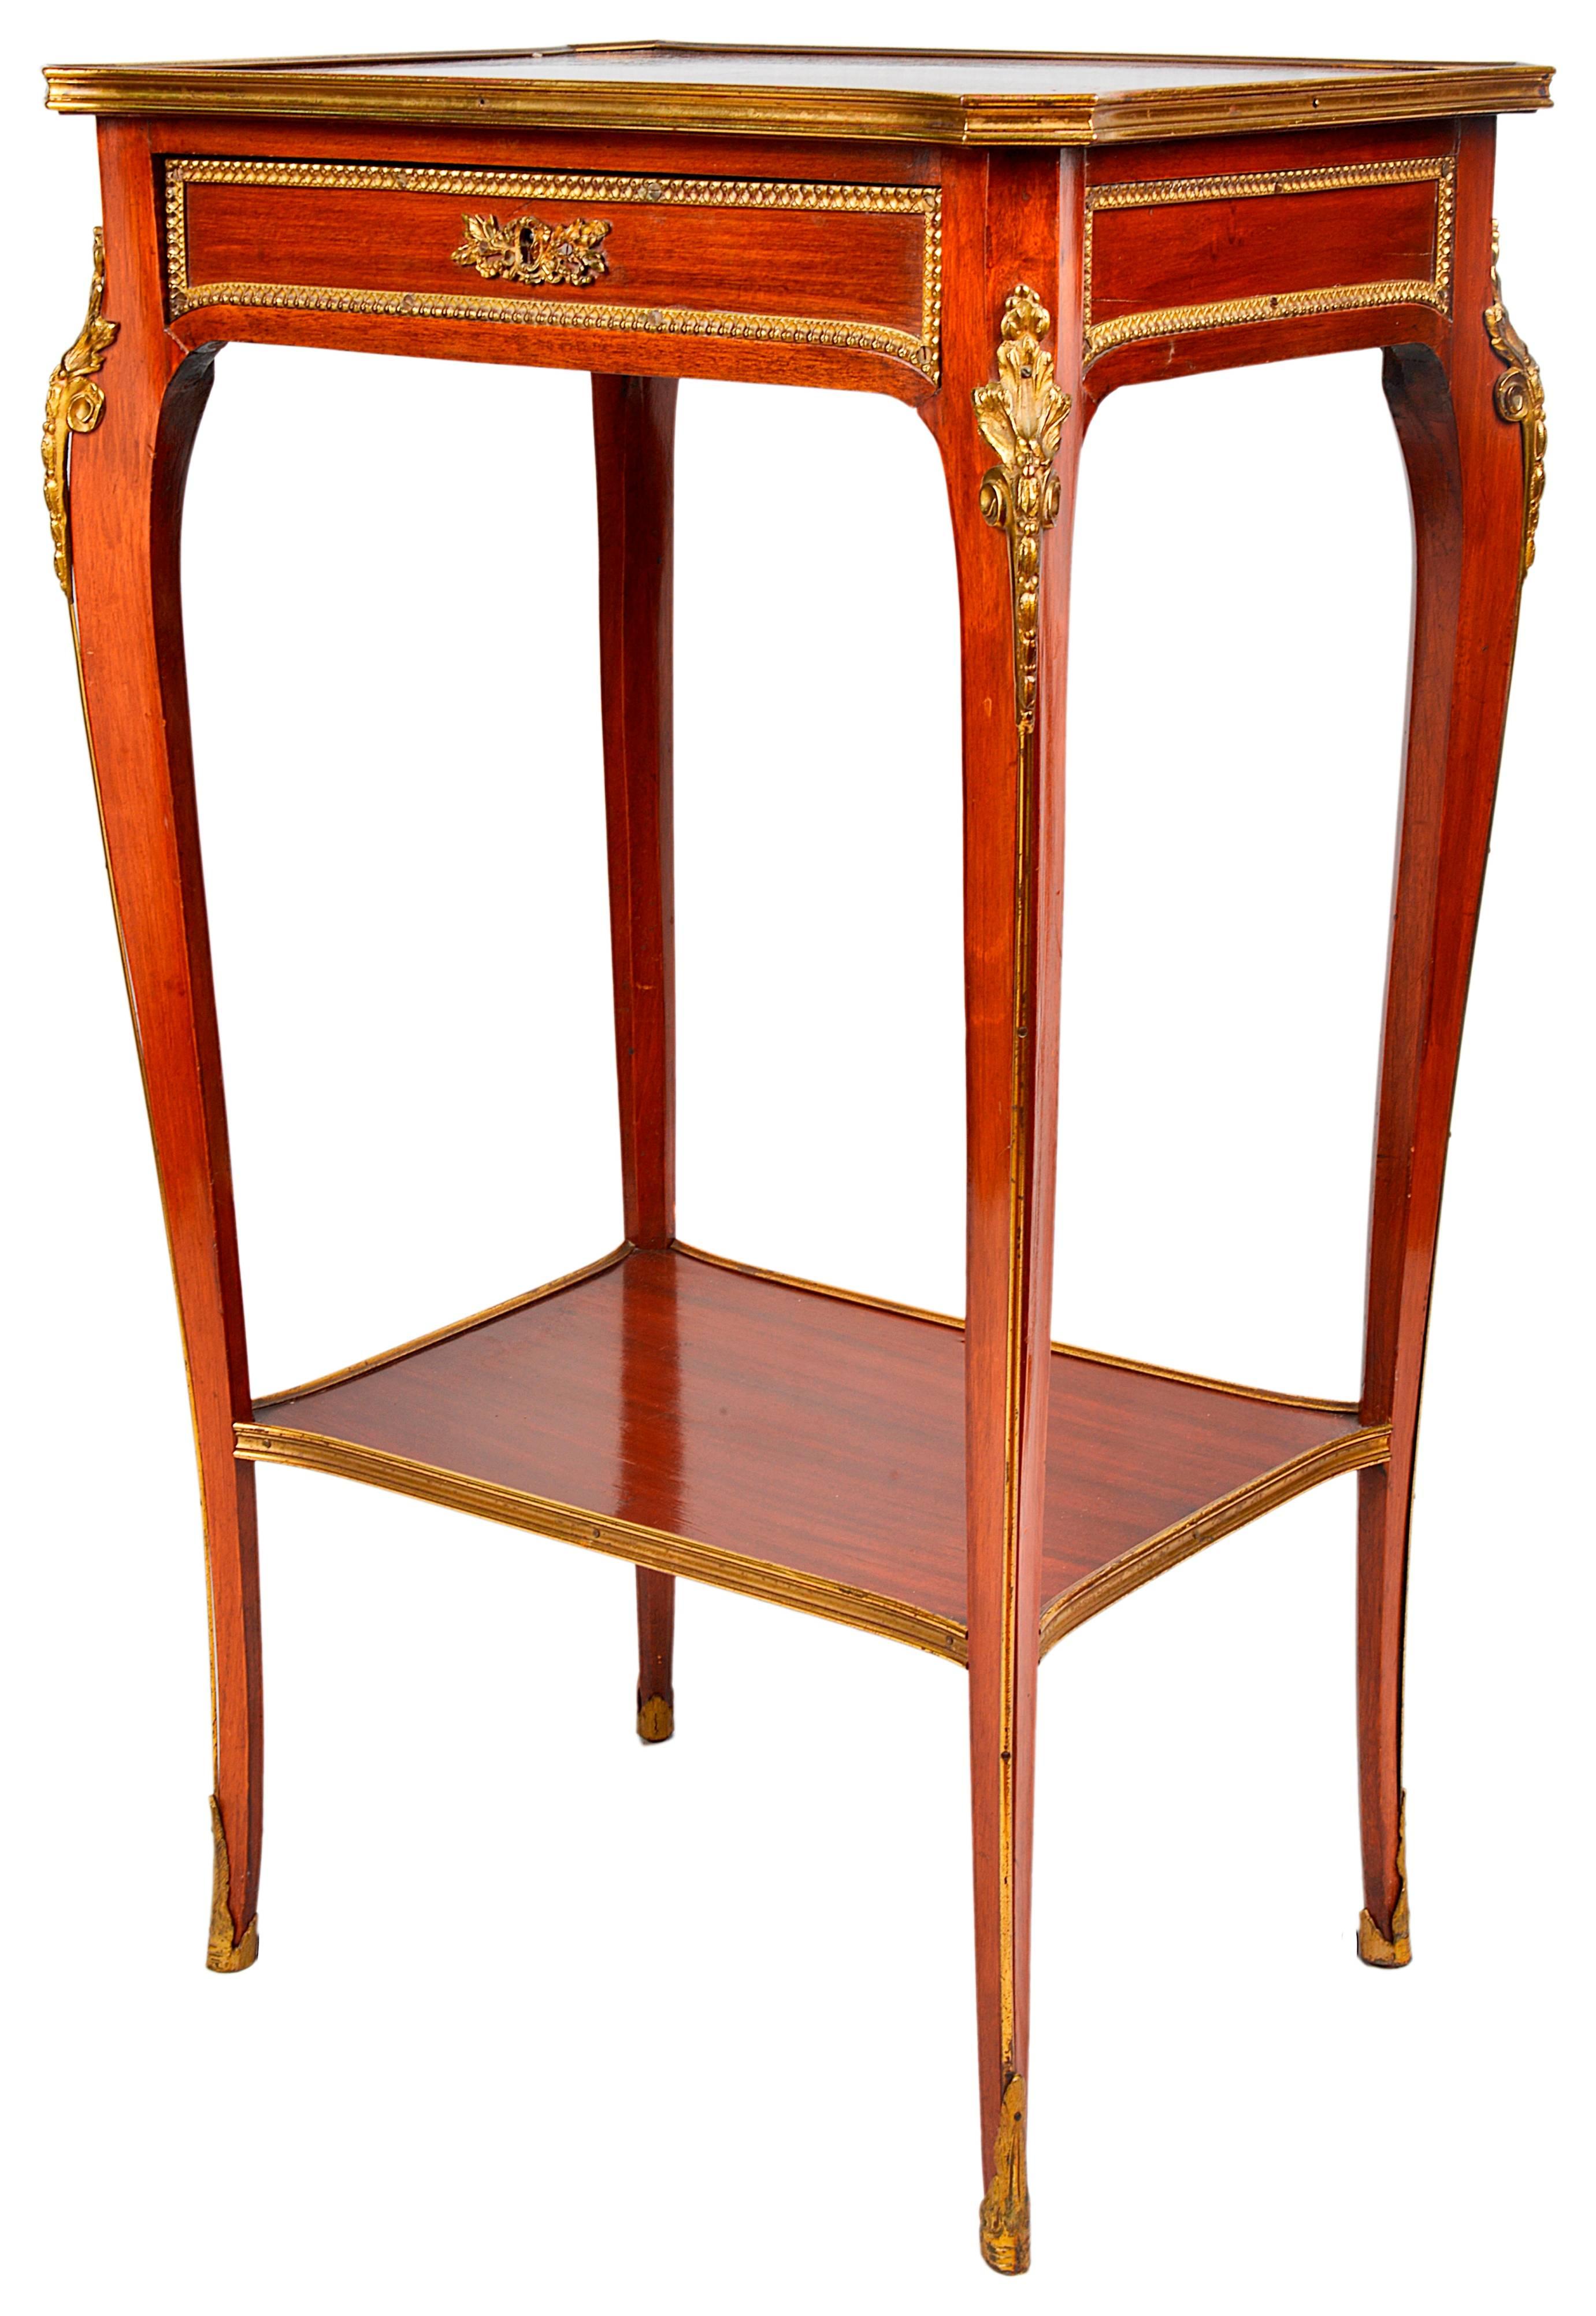 A good quality pair of French freestanding late 19th century mahogany side tables, each with a frieze drawer a shelf beneath and ormolu-mounted.